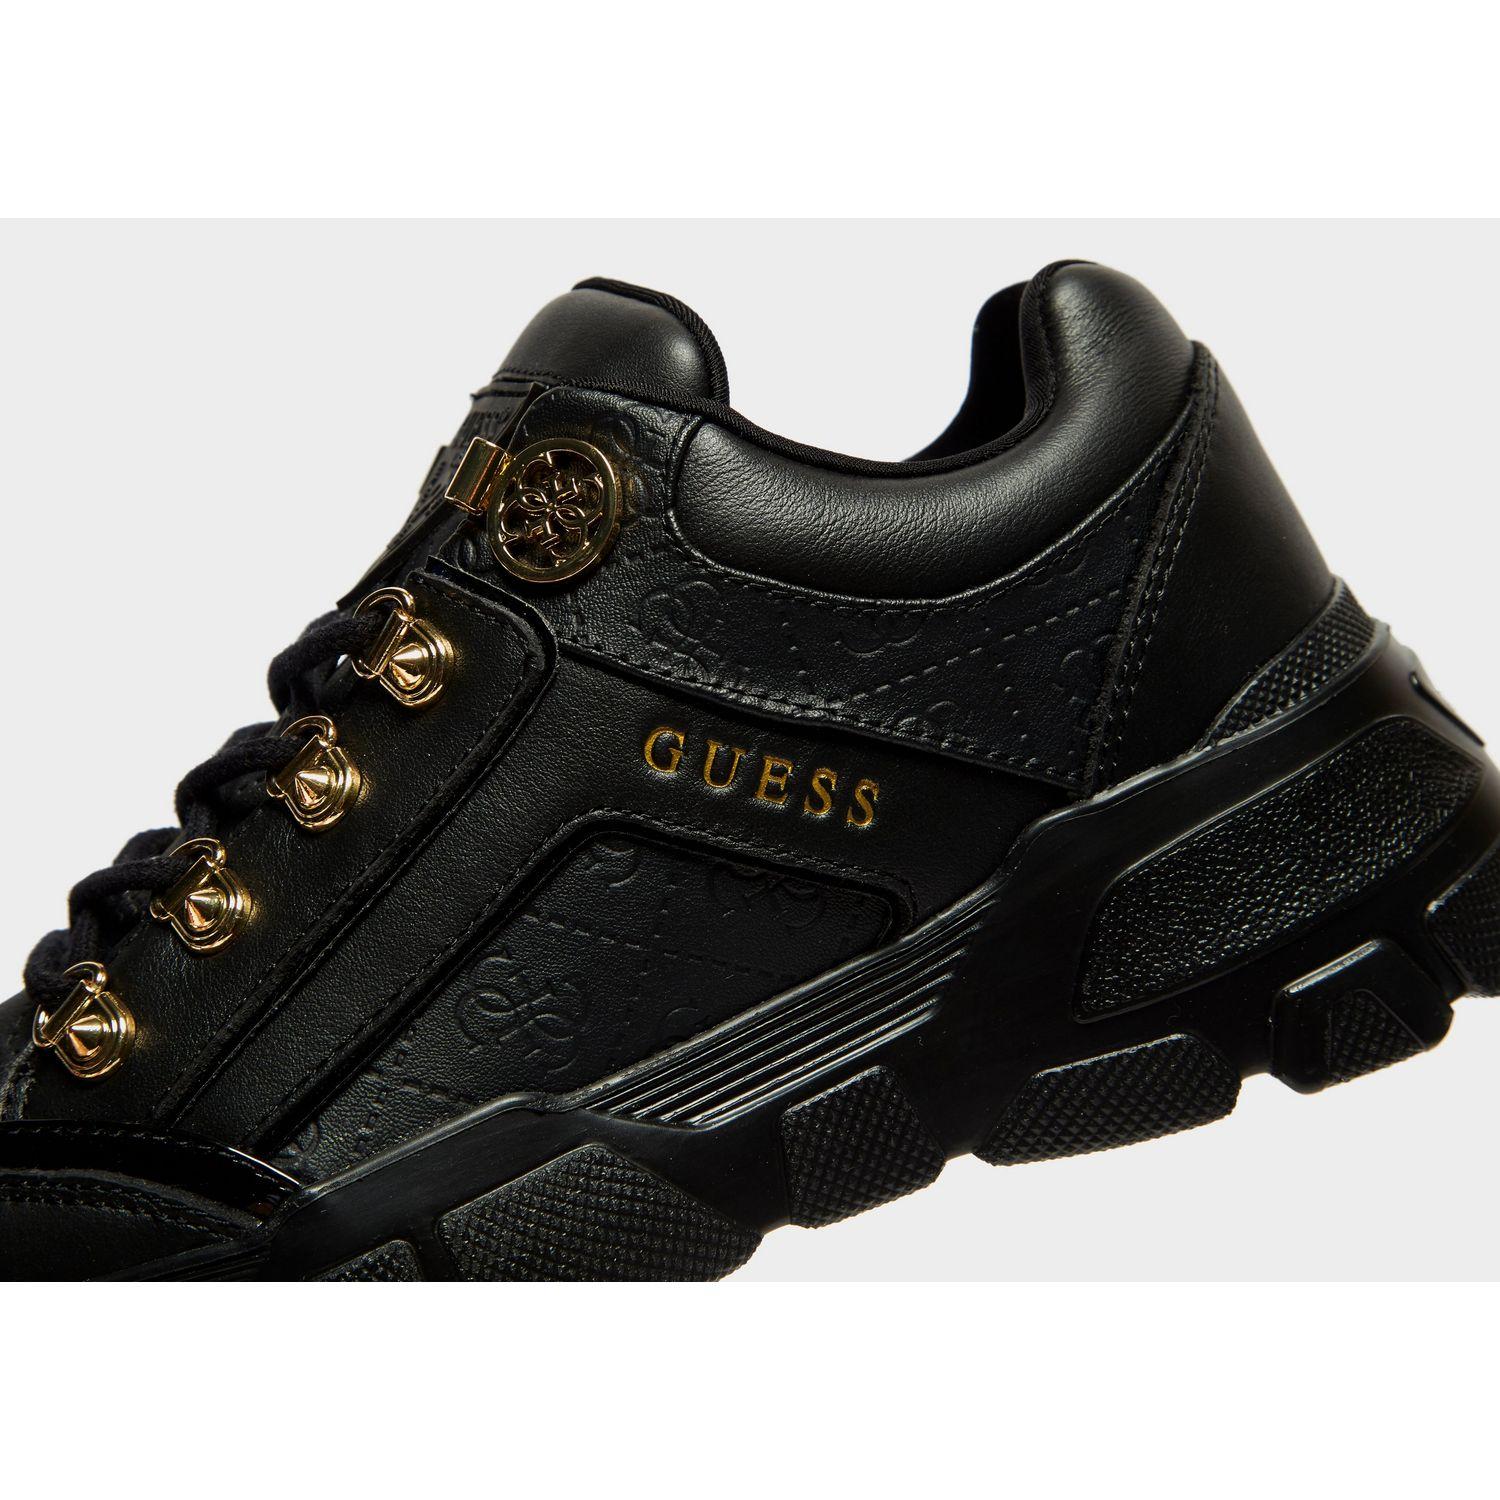 guess black and gold shoes